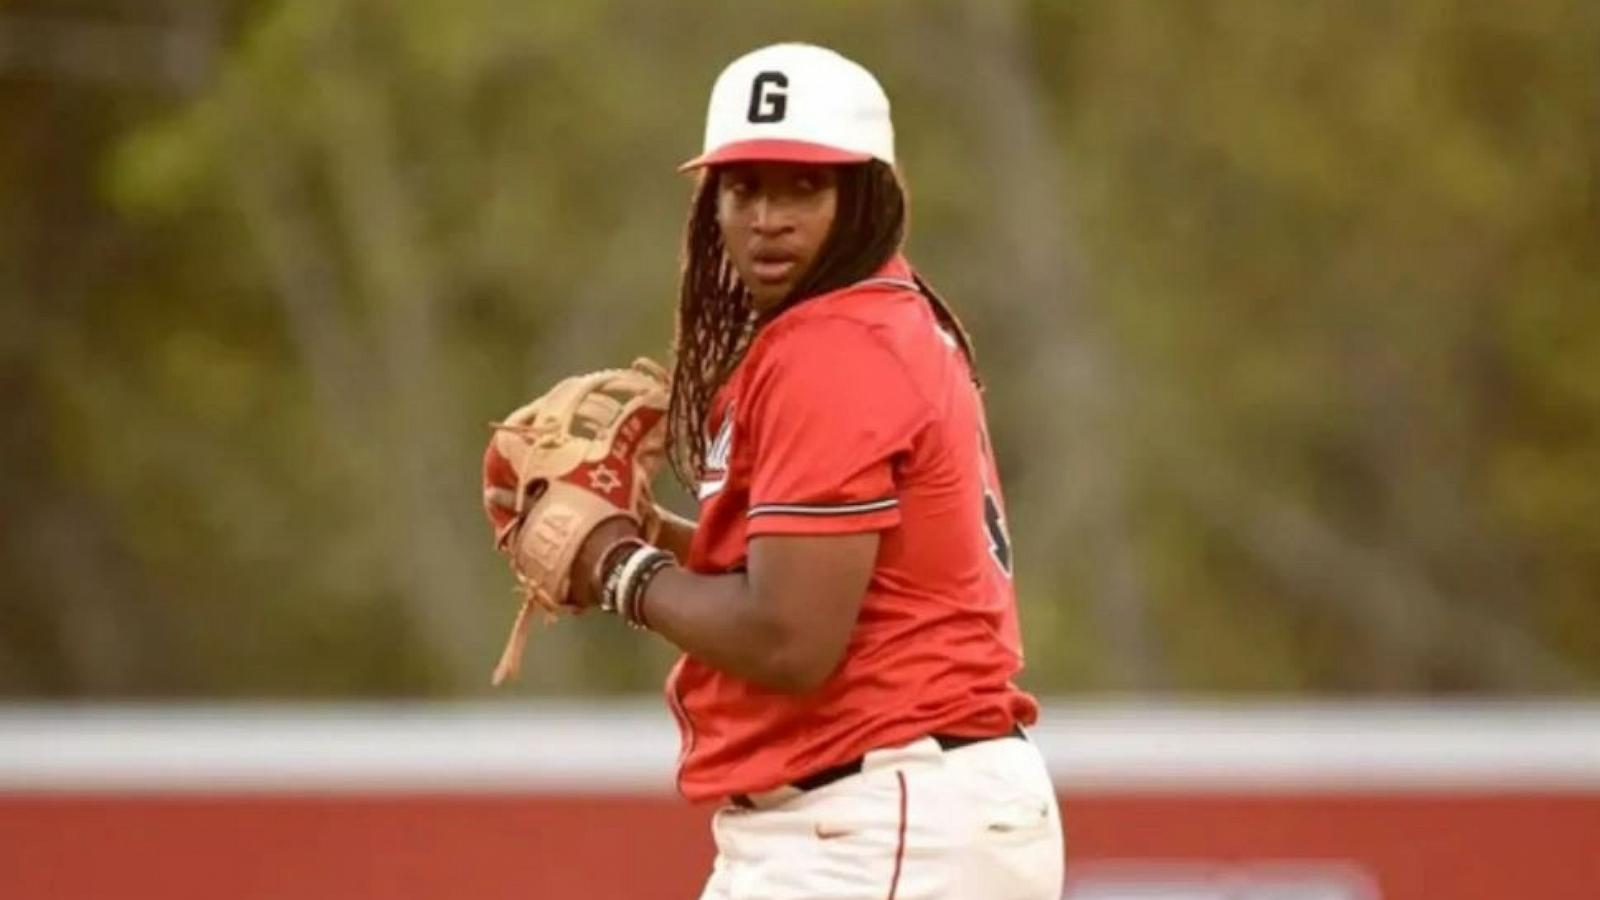 Batting cage accident at Georgia high school leaves a player in a coma